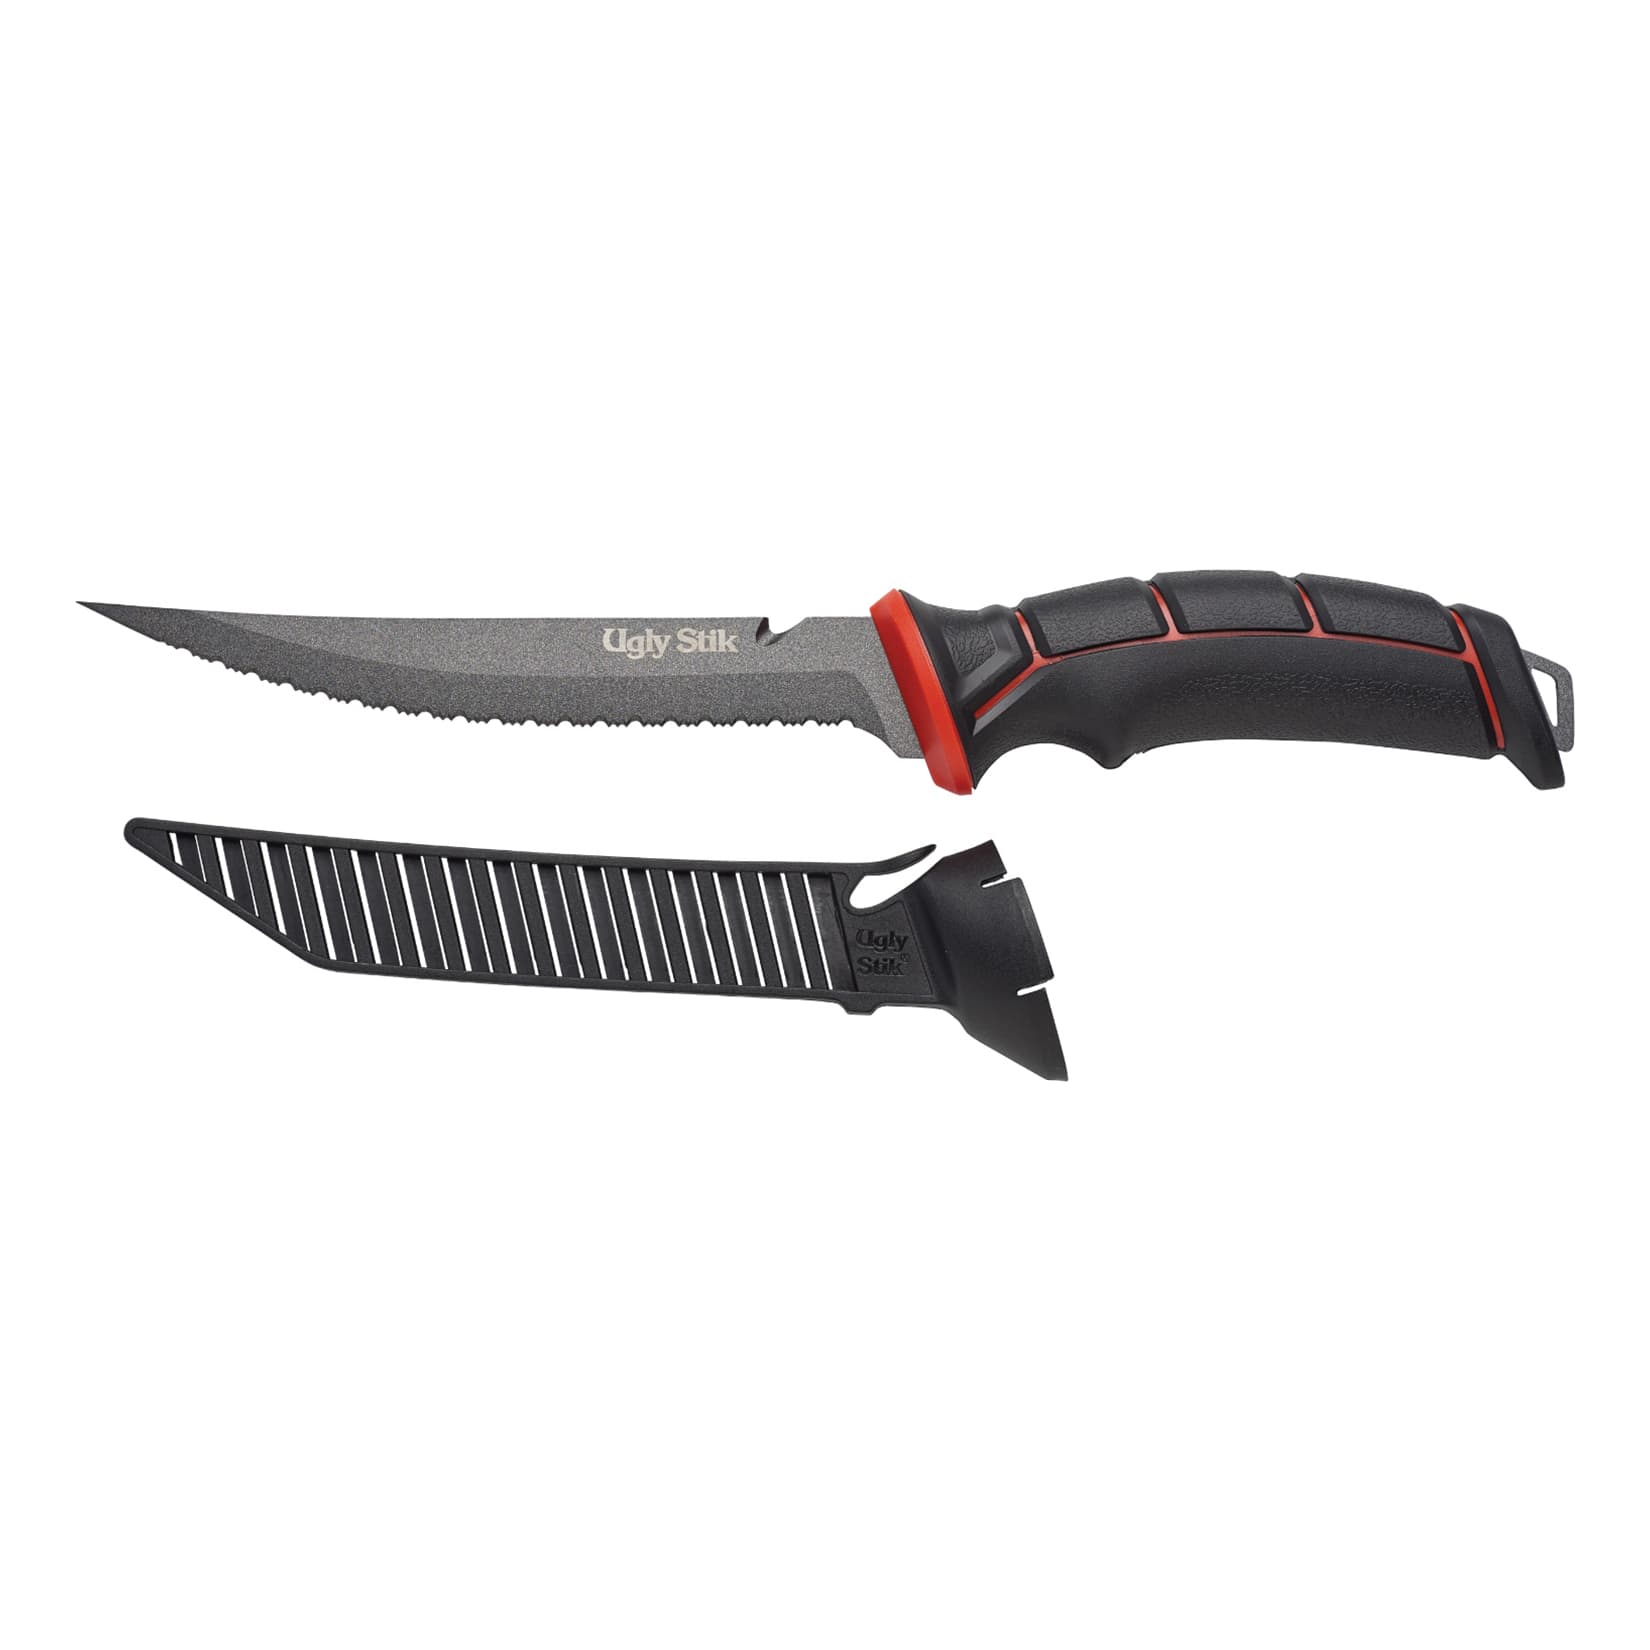 Bass Pro Shops XPS Lithium-Ion Battery-Powered Fillet Knife